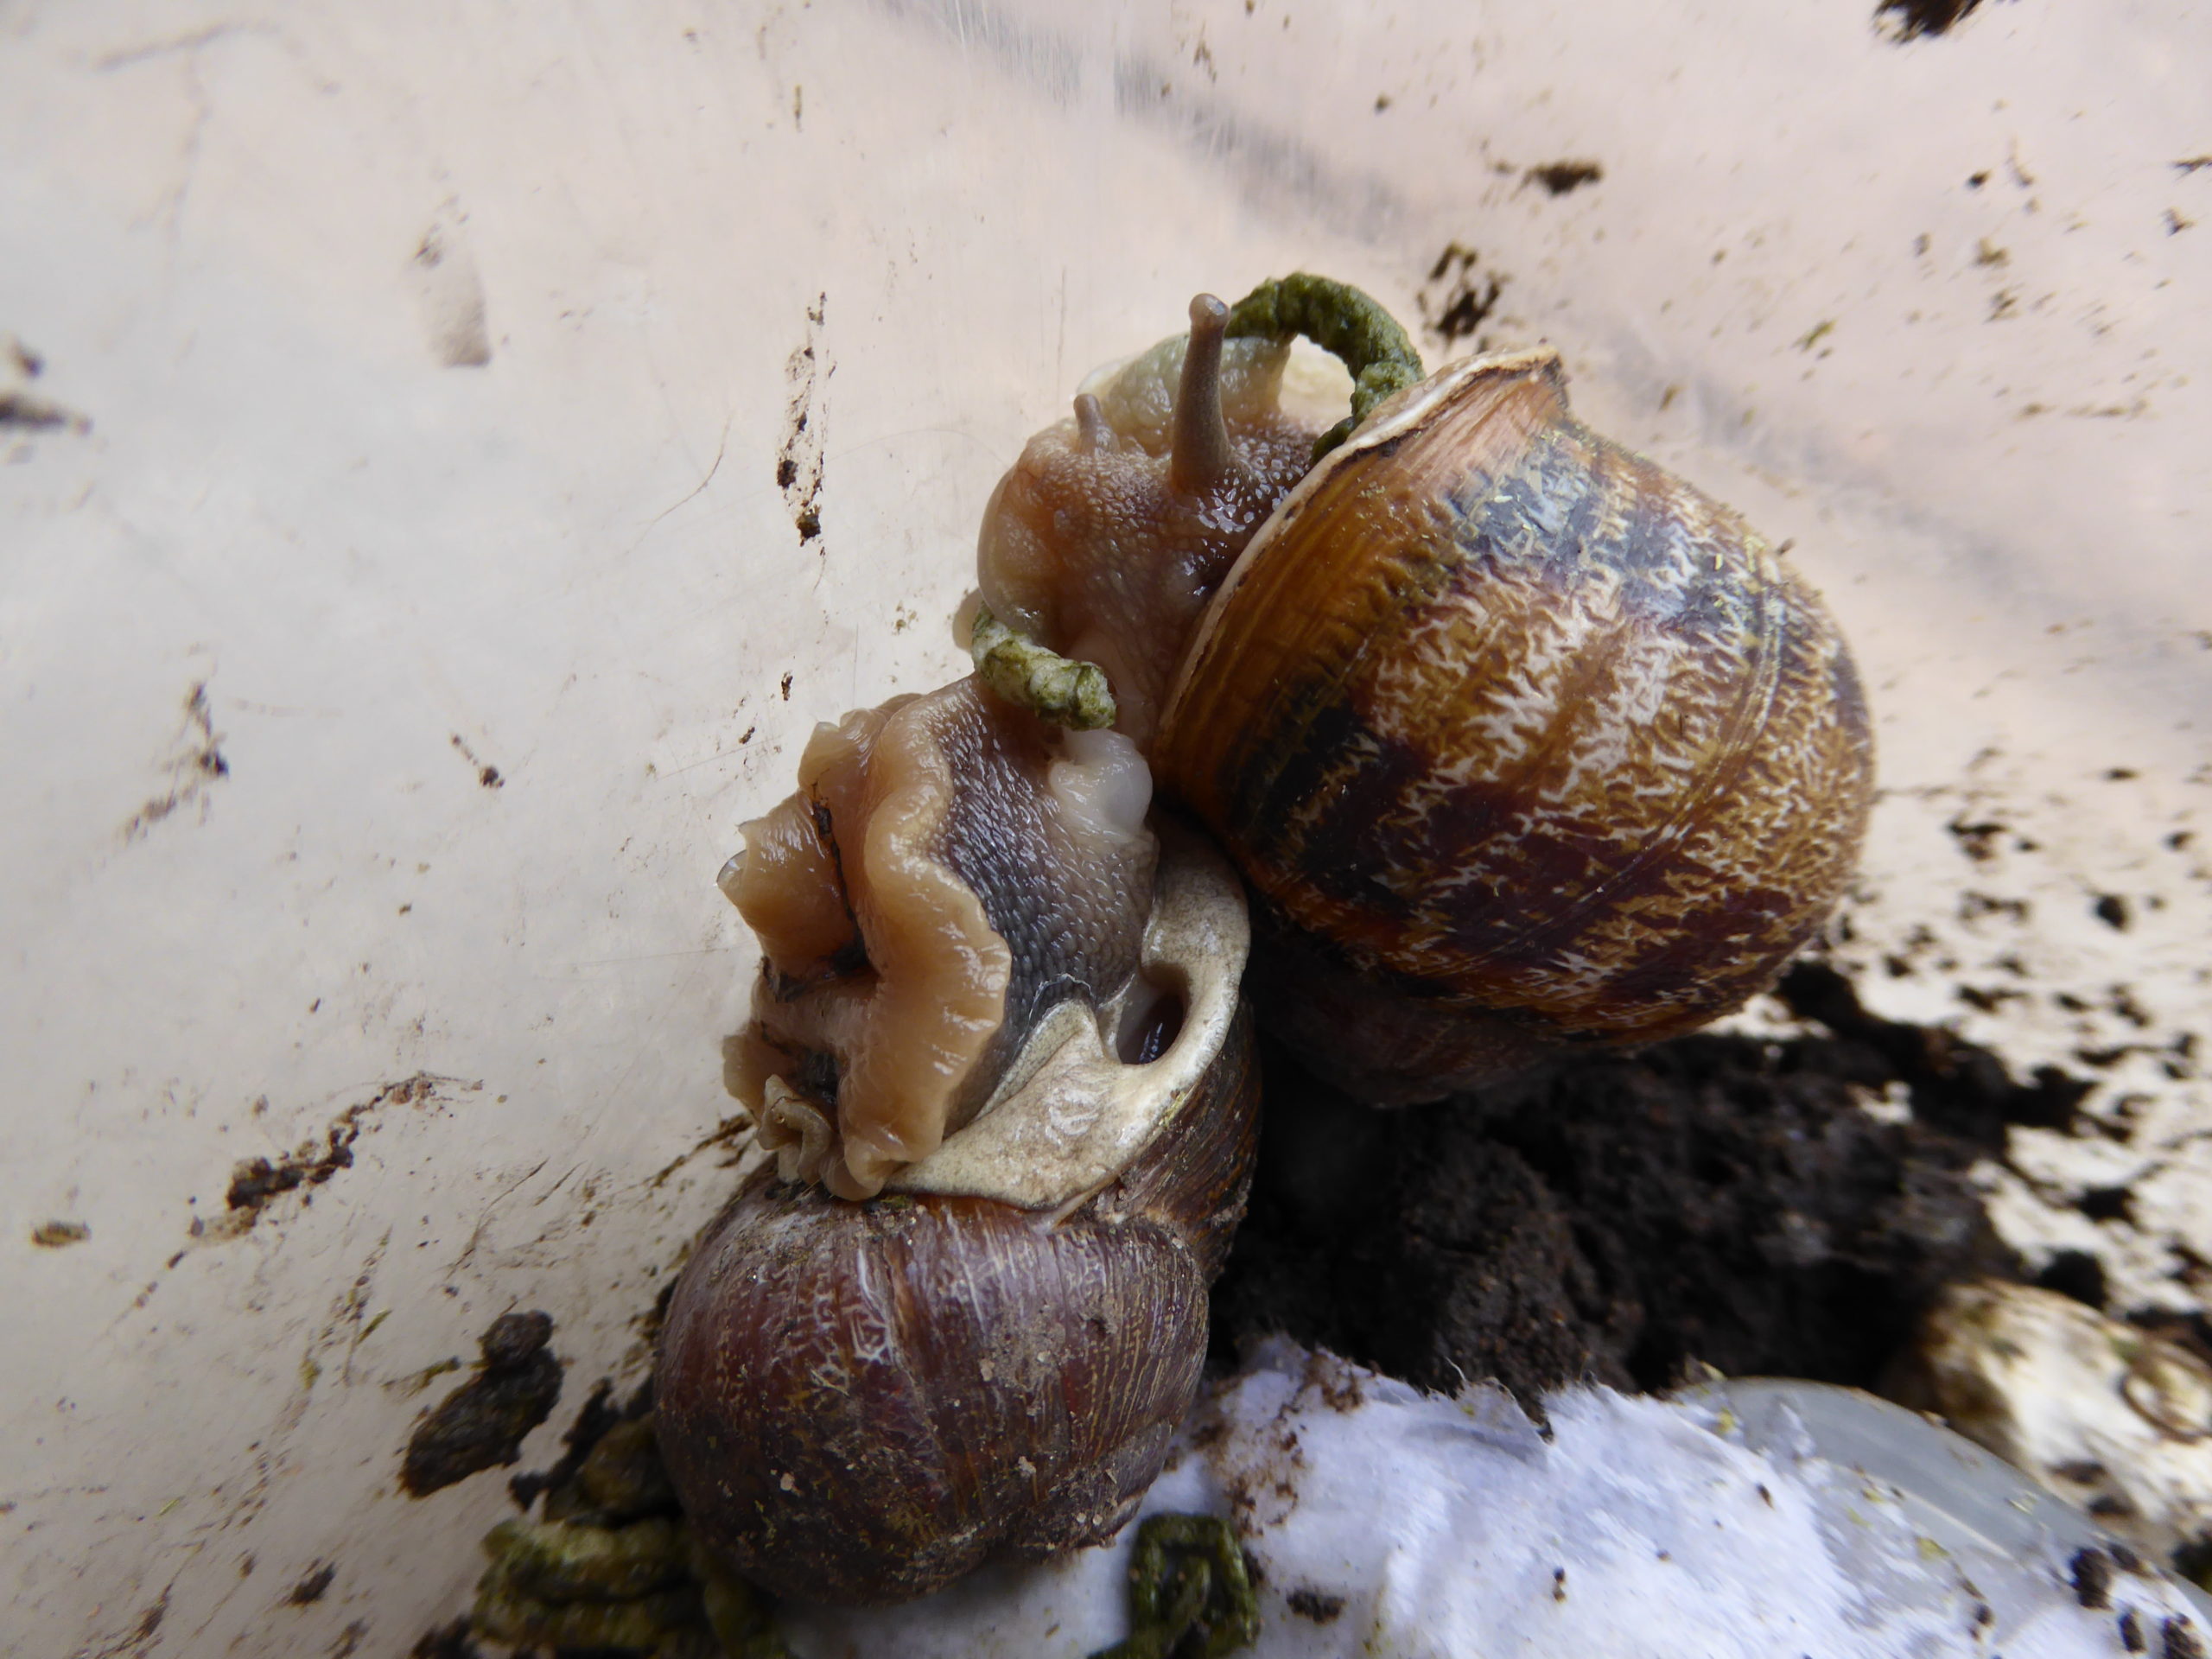 Lefty Snail Jeremy Has Died, Bringing A Heartwarming Story To An End